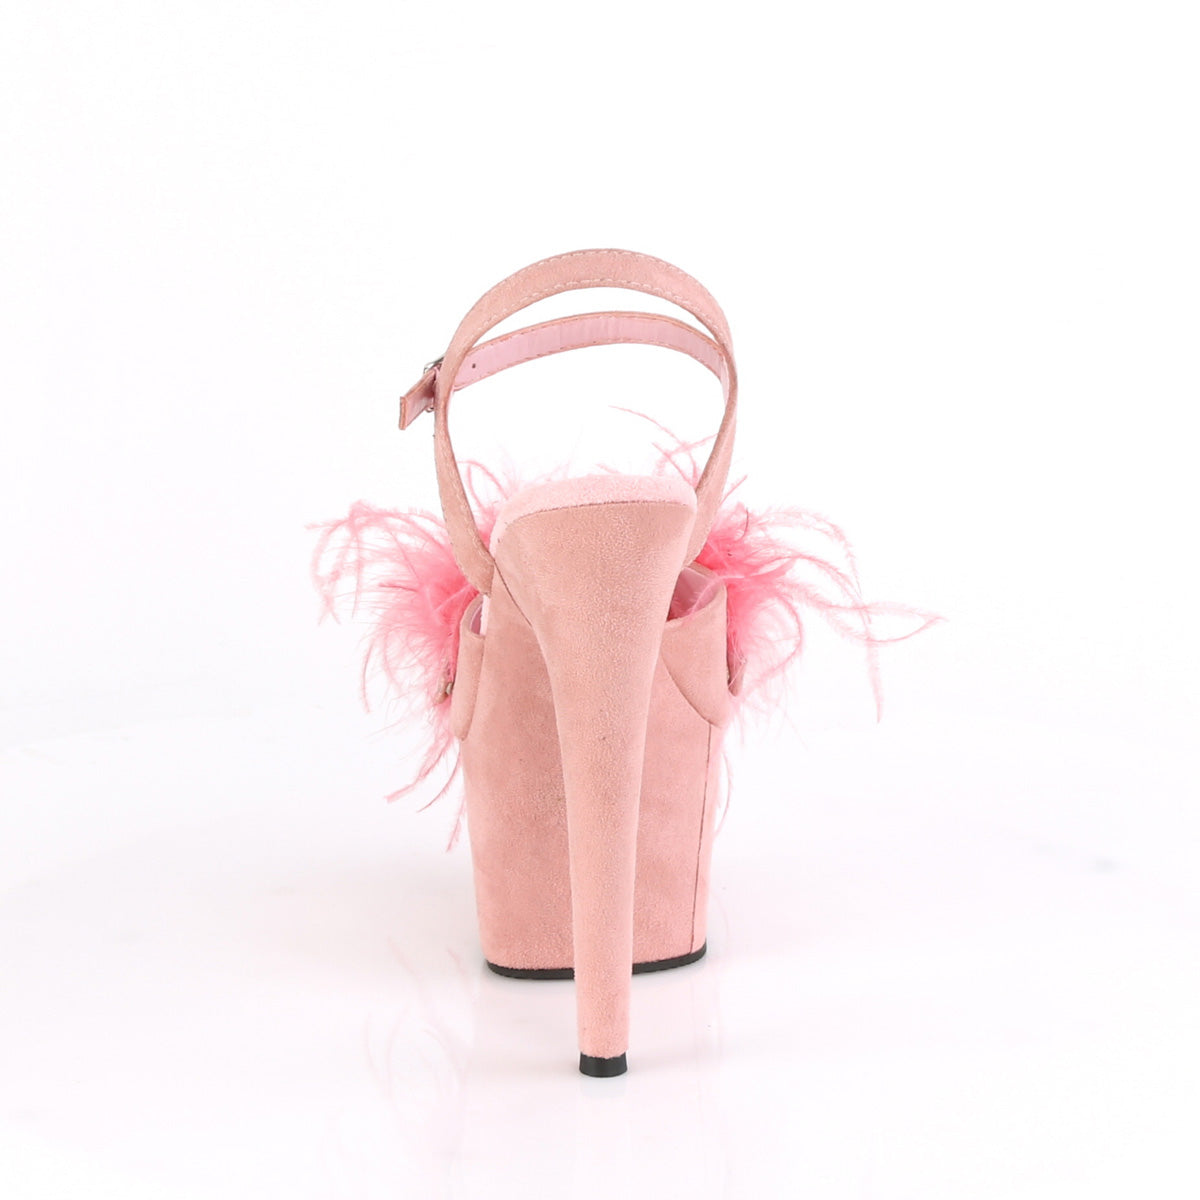 ADORE-709F Baby Pink Faux Suede-Feather/Baby Pink Faux Suede Platform Sandal Pleaser